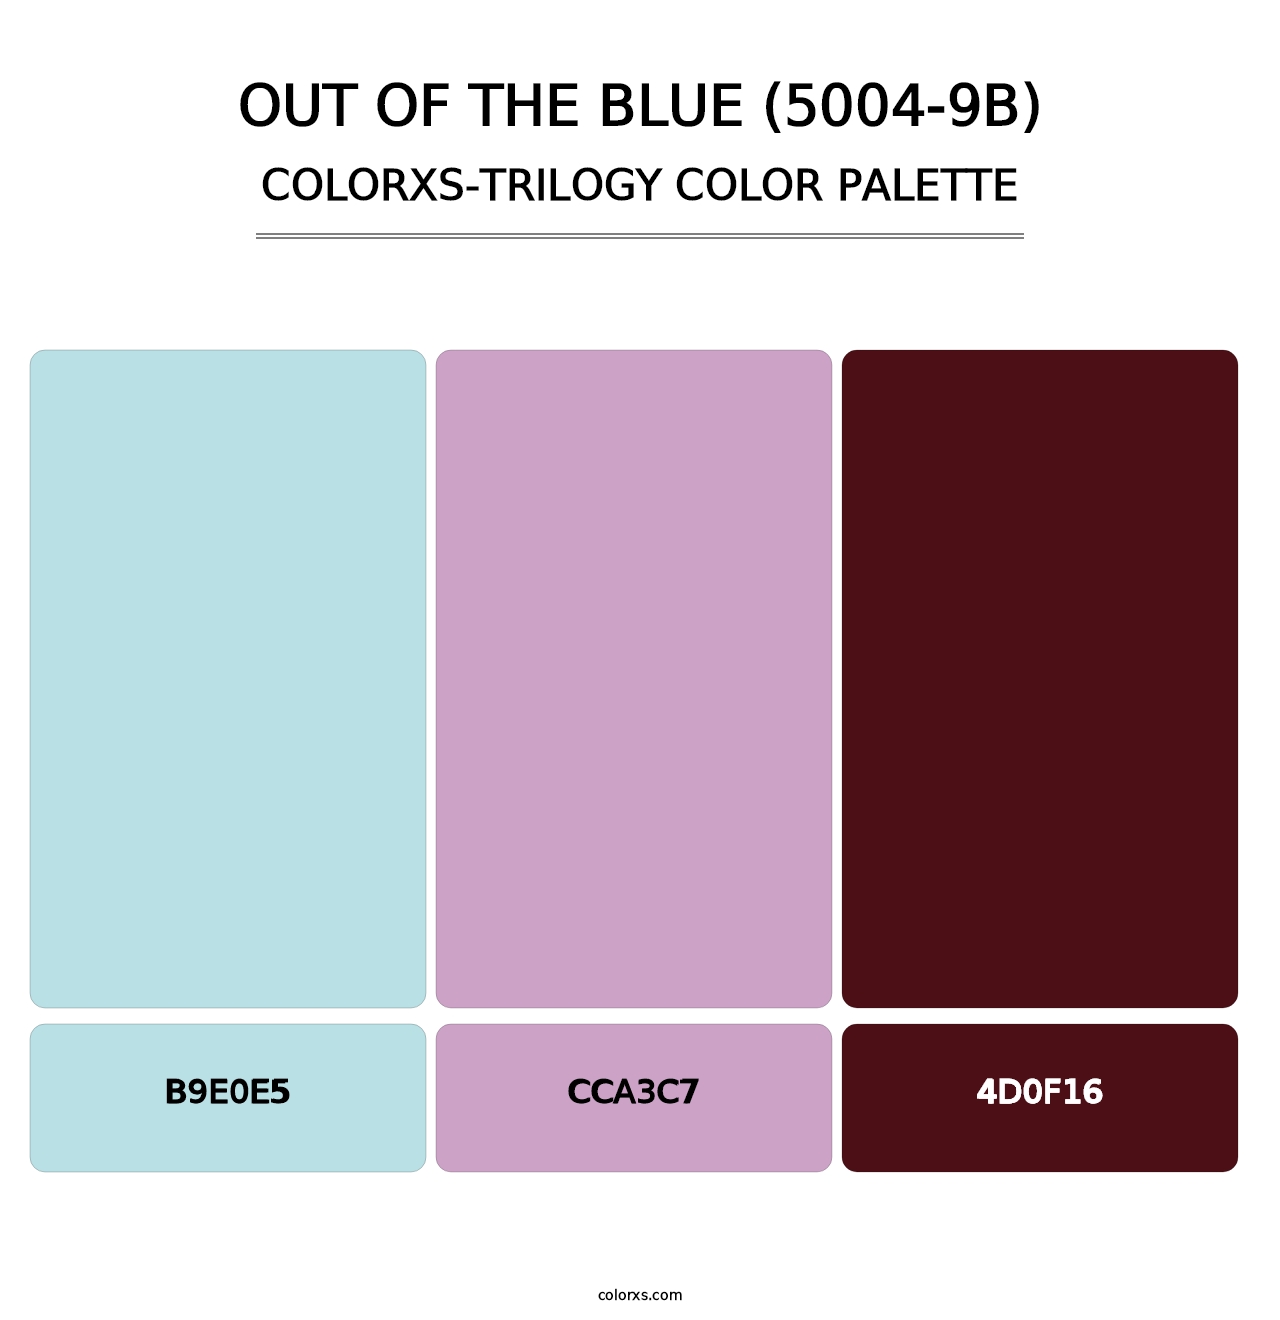 Out of the Blue (5004-9B) - Colorxs Trilogy Palette